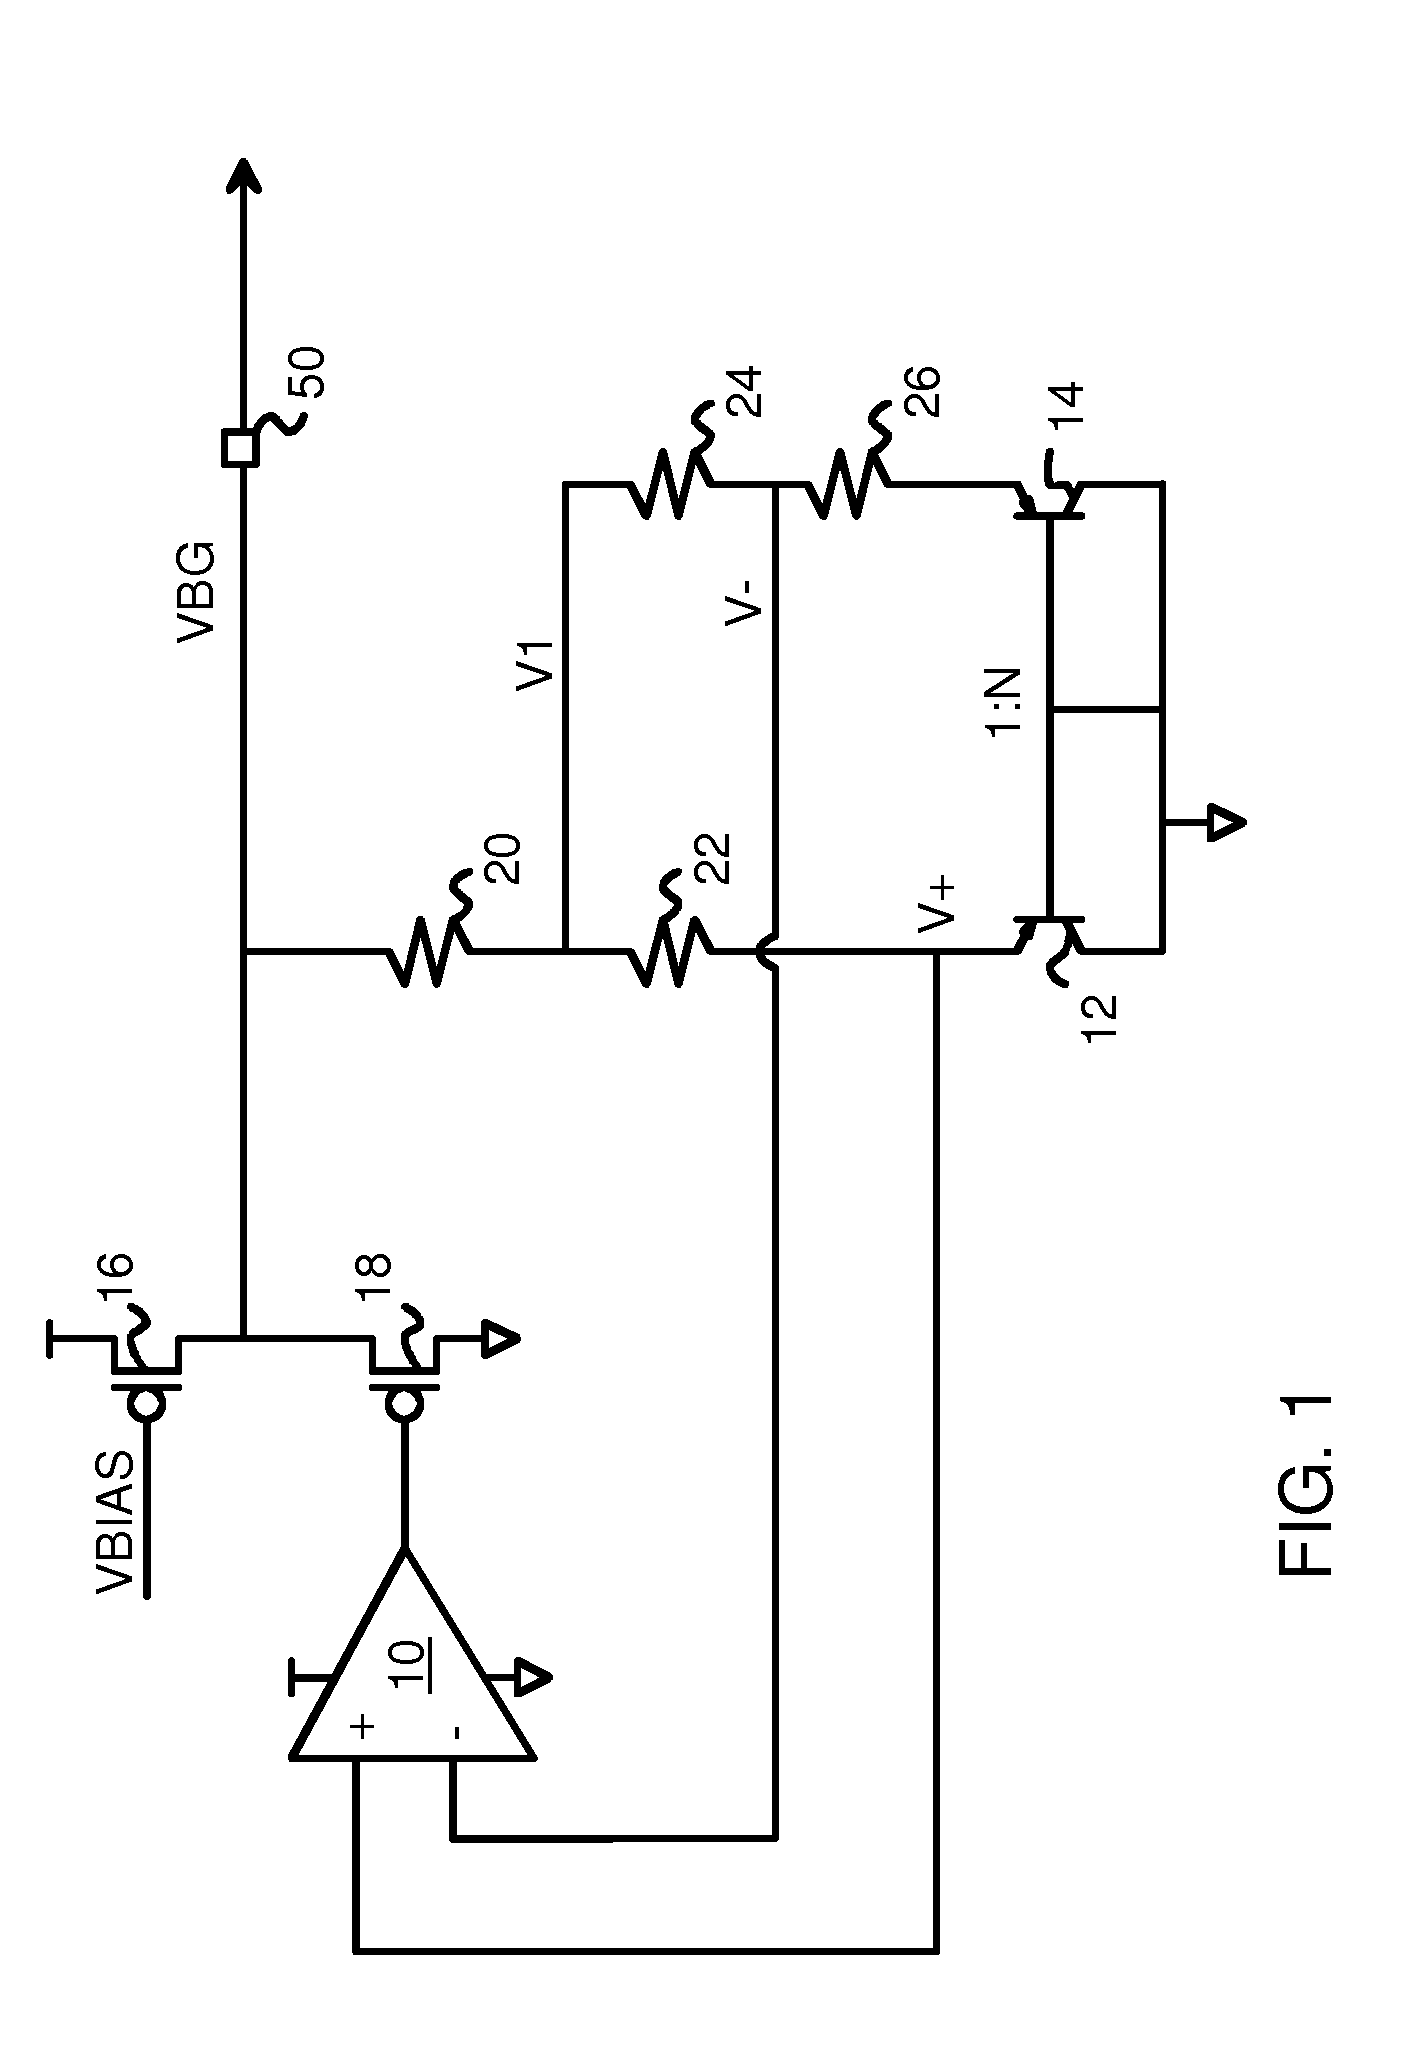 Bi-directional trimming methods and circuits for a precise band-gap reference